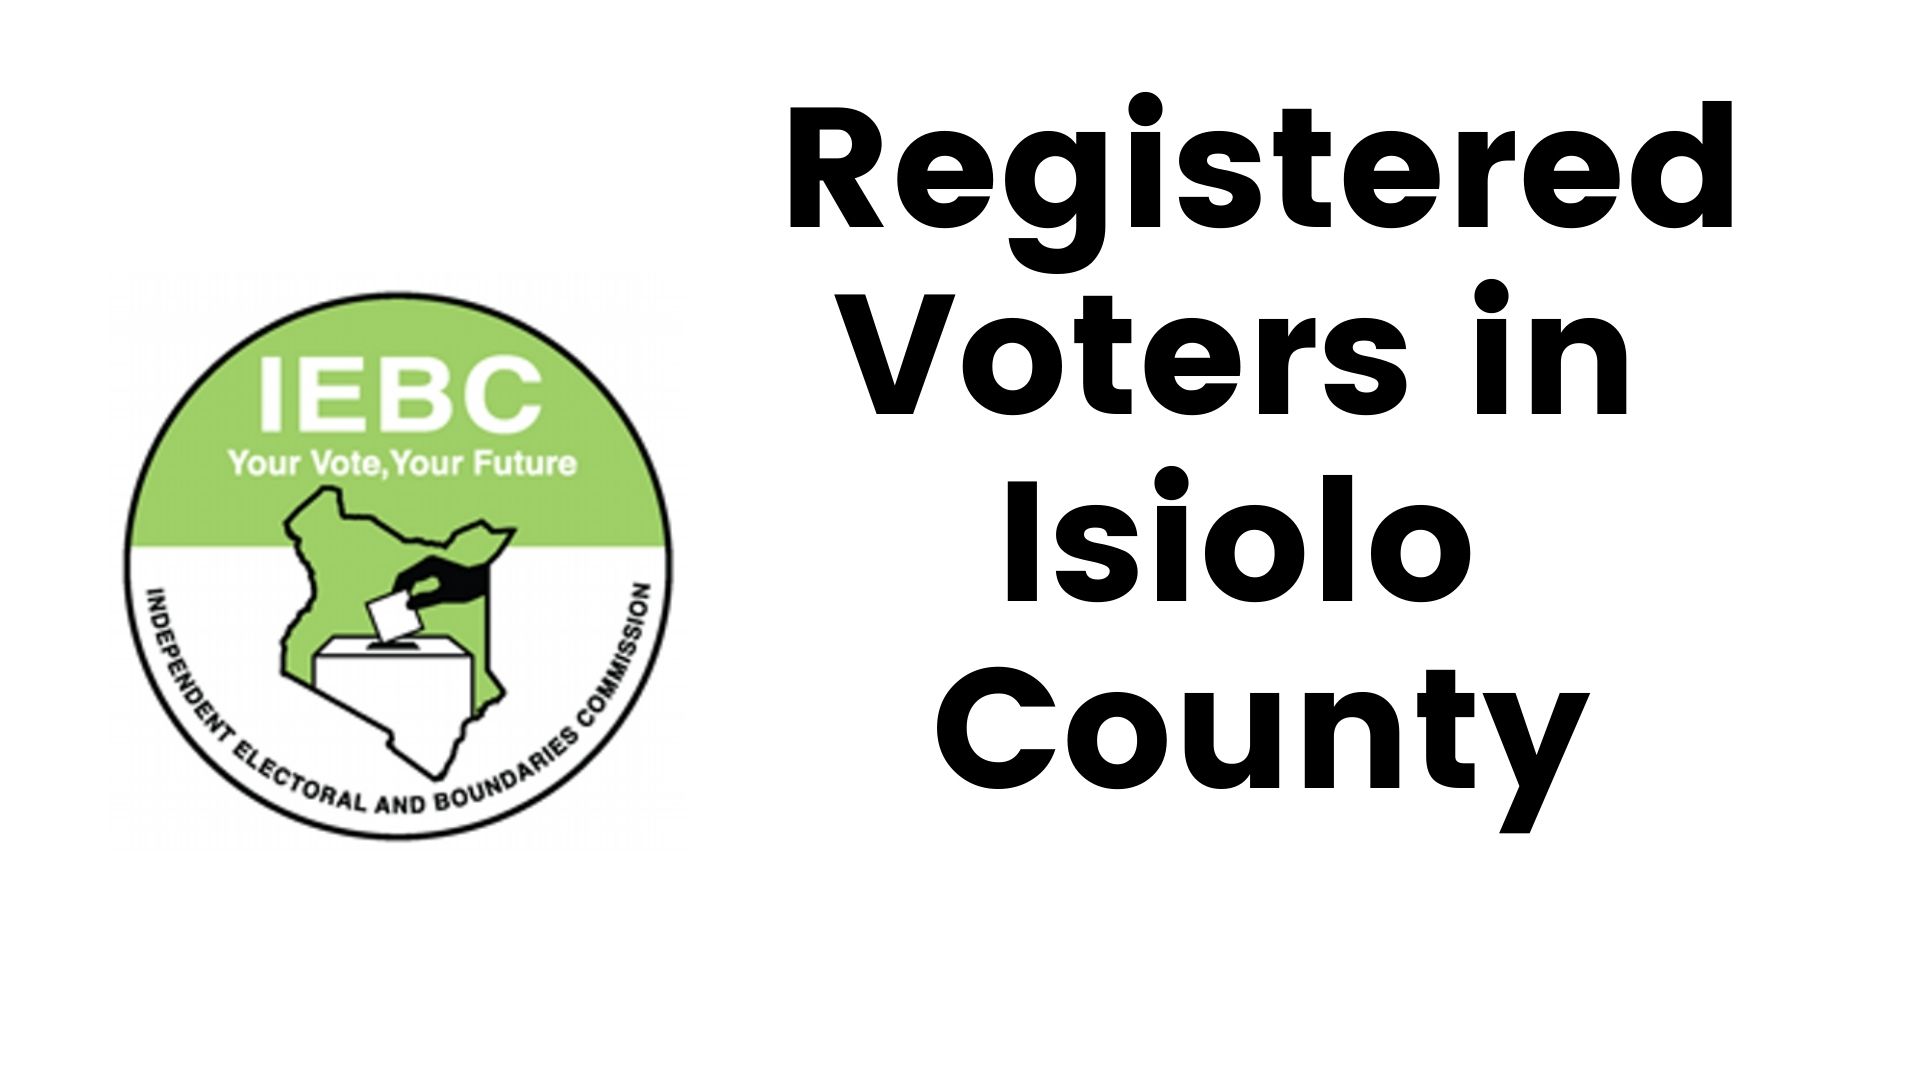 IEBC Isiolo County Registered Voters